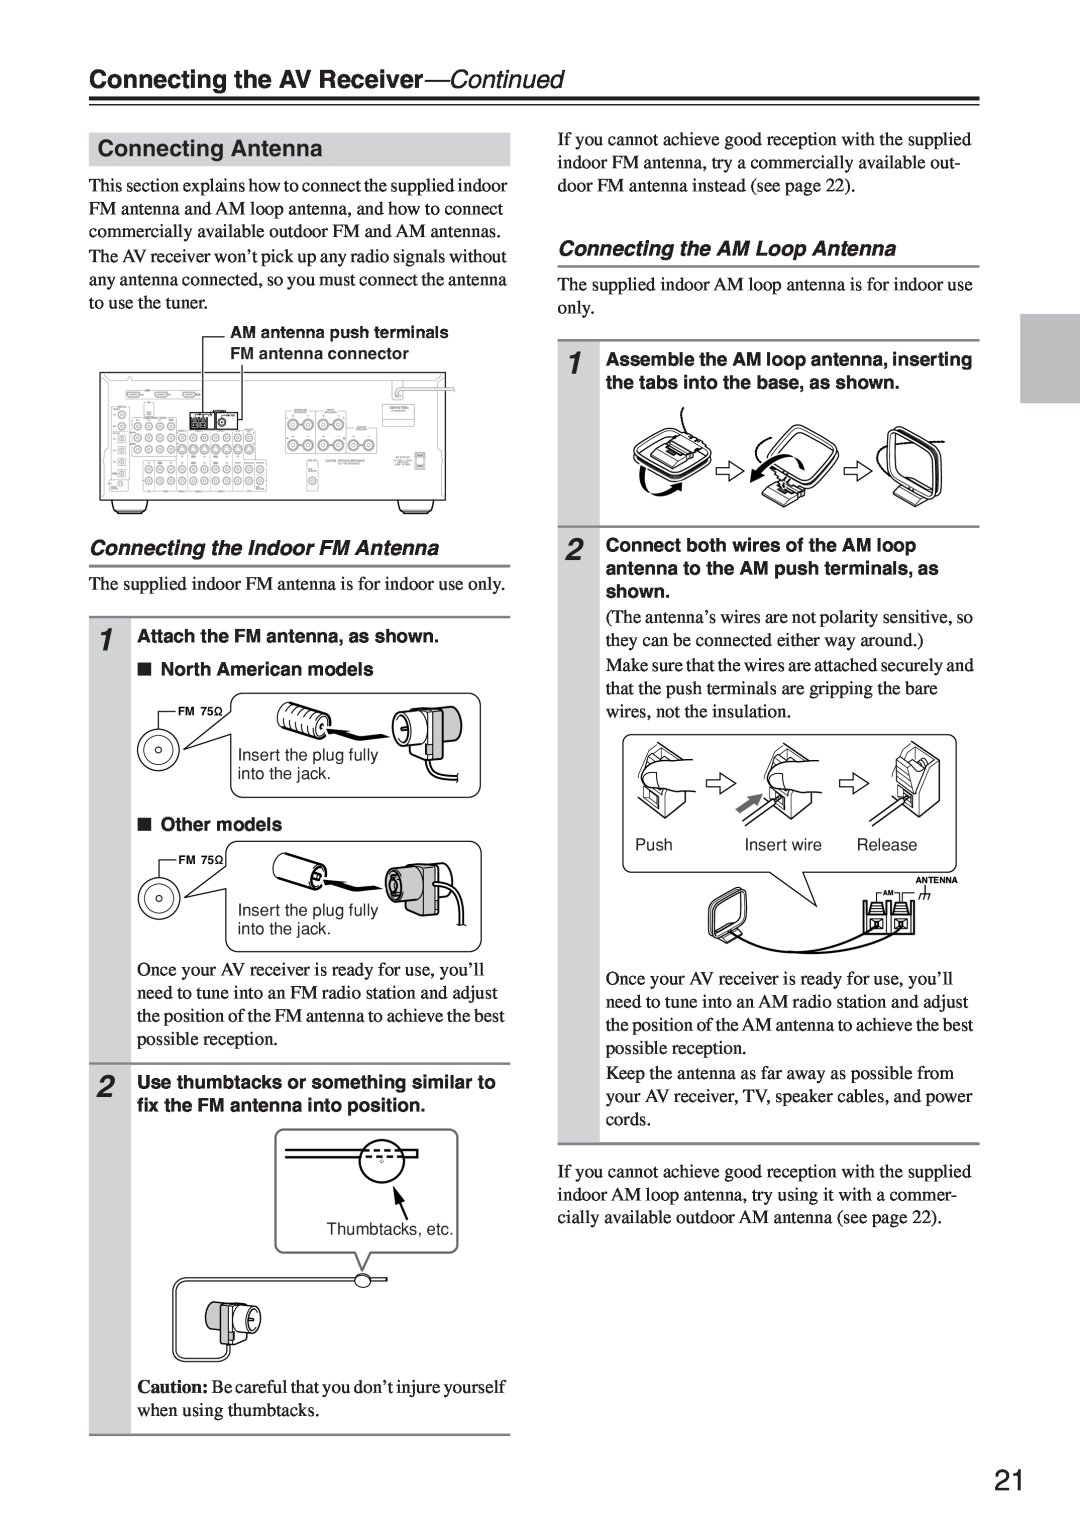 Onkyo HT-R640 instruction manual Connecting Antenna, Connecting the Indoor FM Antenna, Connecting the AM Loop Antenna 